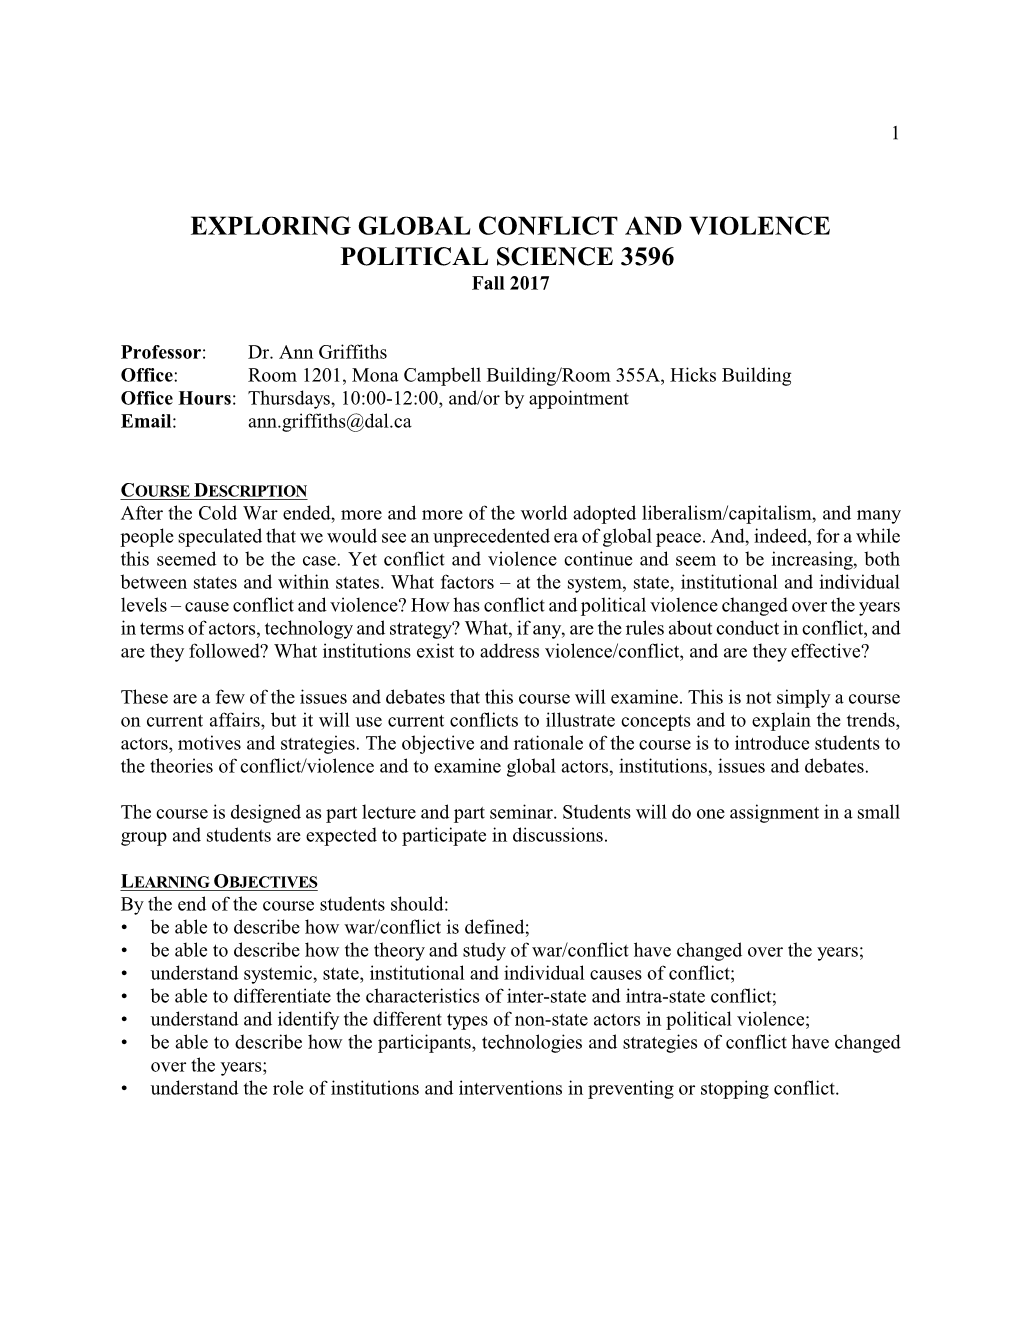 EXPLORING GLOBAL CONFLICT and VIOLENCE POLITICAL SCIENCE 3596 Fall 2017